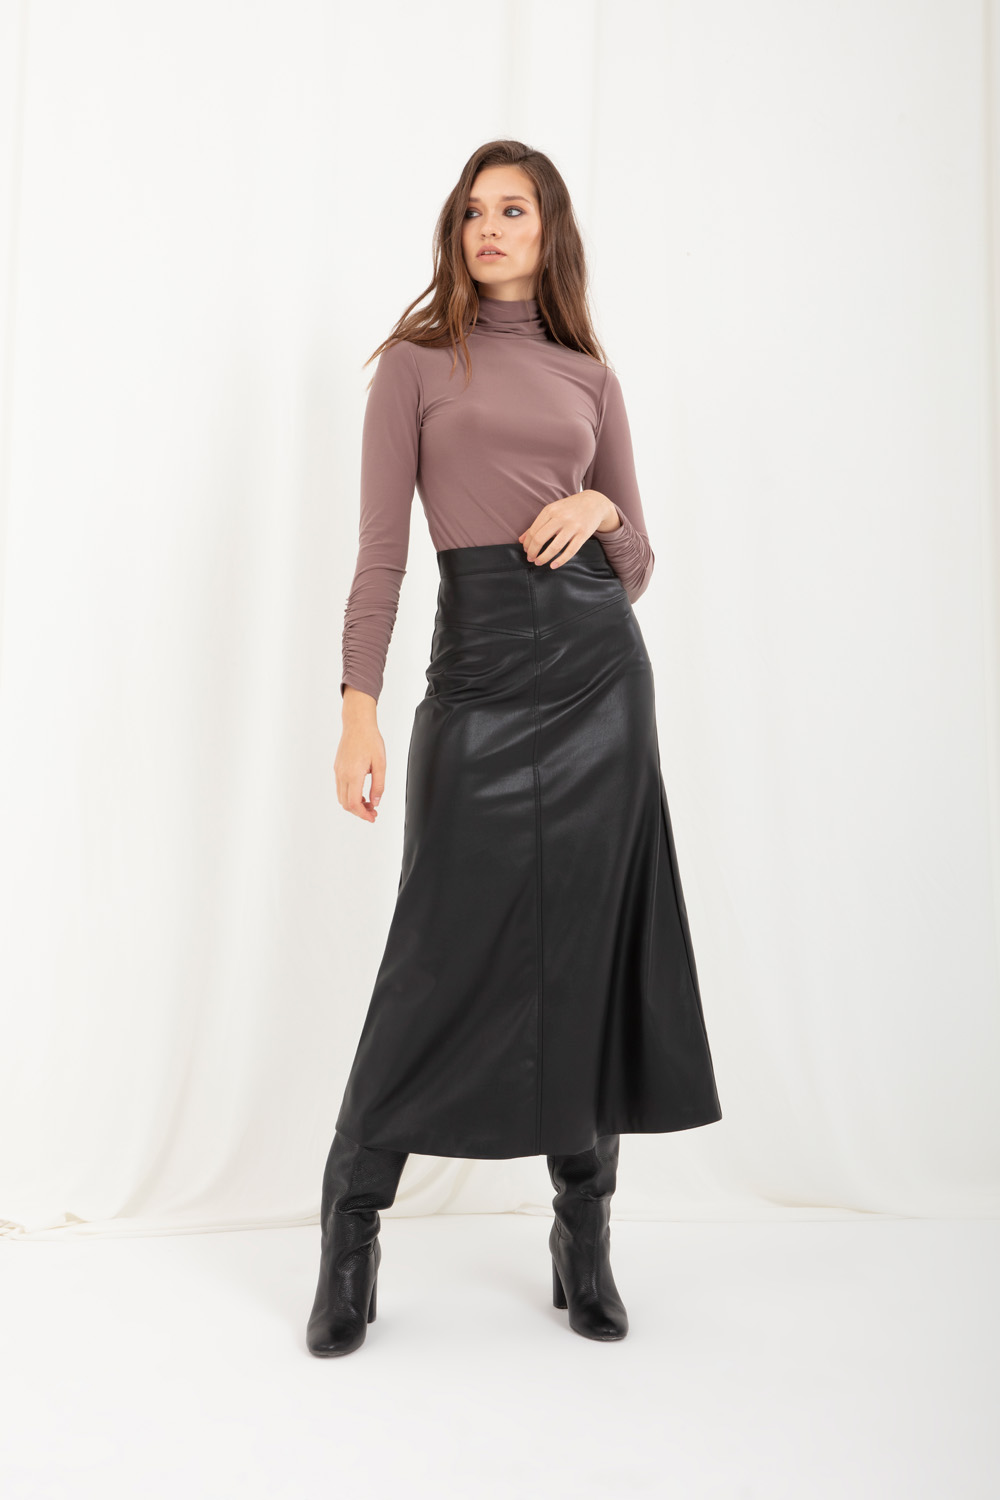 Faux Leather Black Bell Skirt